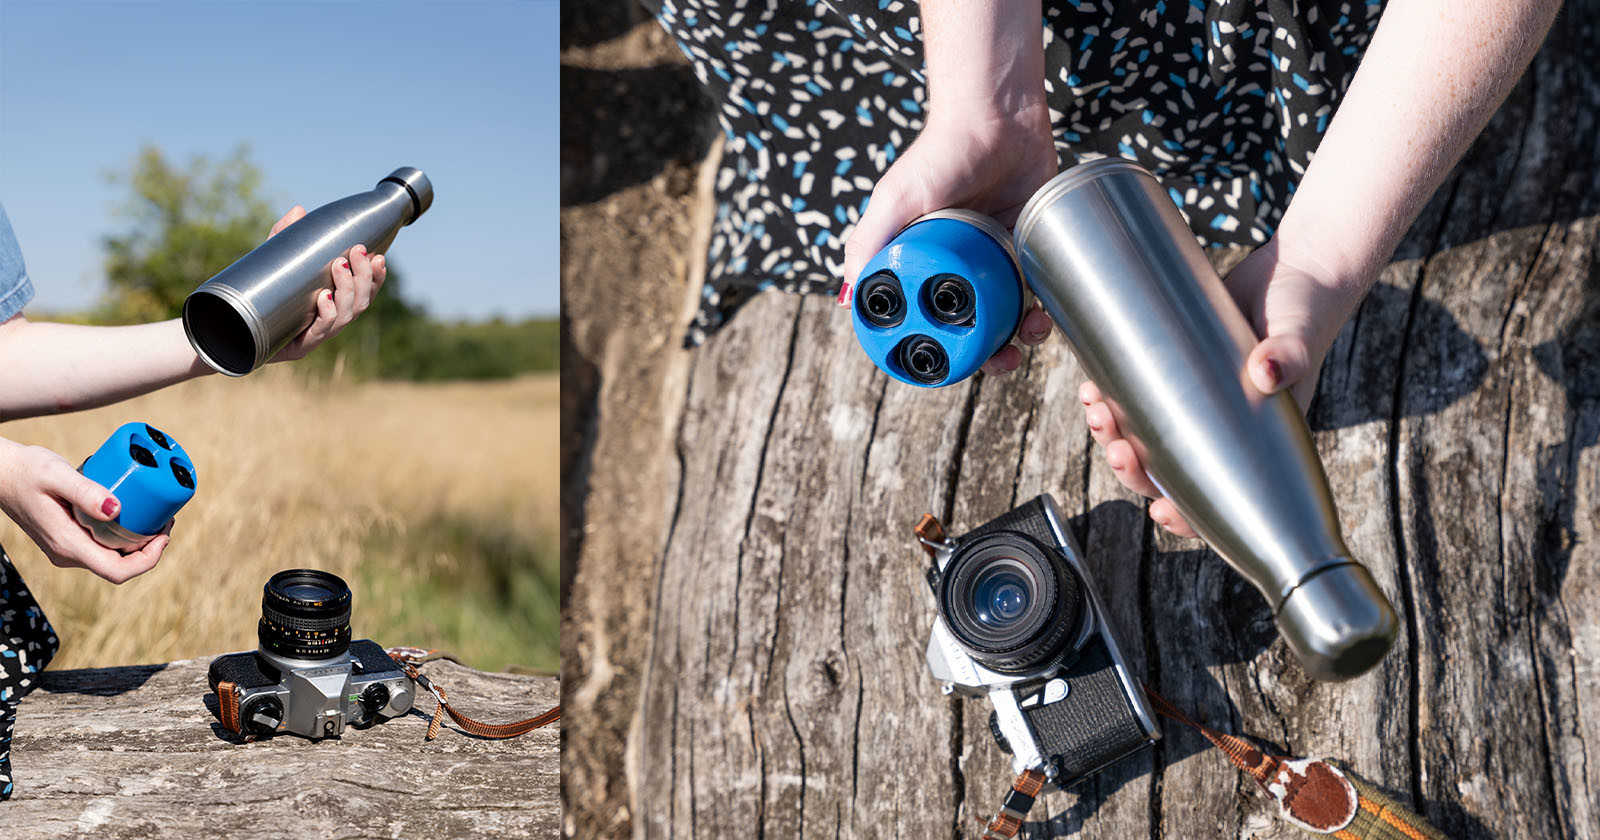 This Dual-Purpose Bottle Keeps Water and Film Cool for 24 Hours